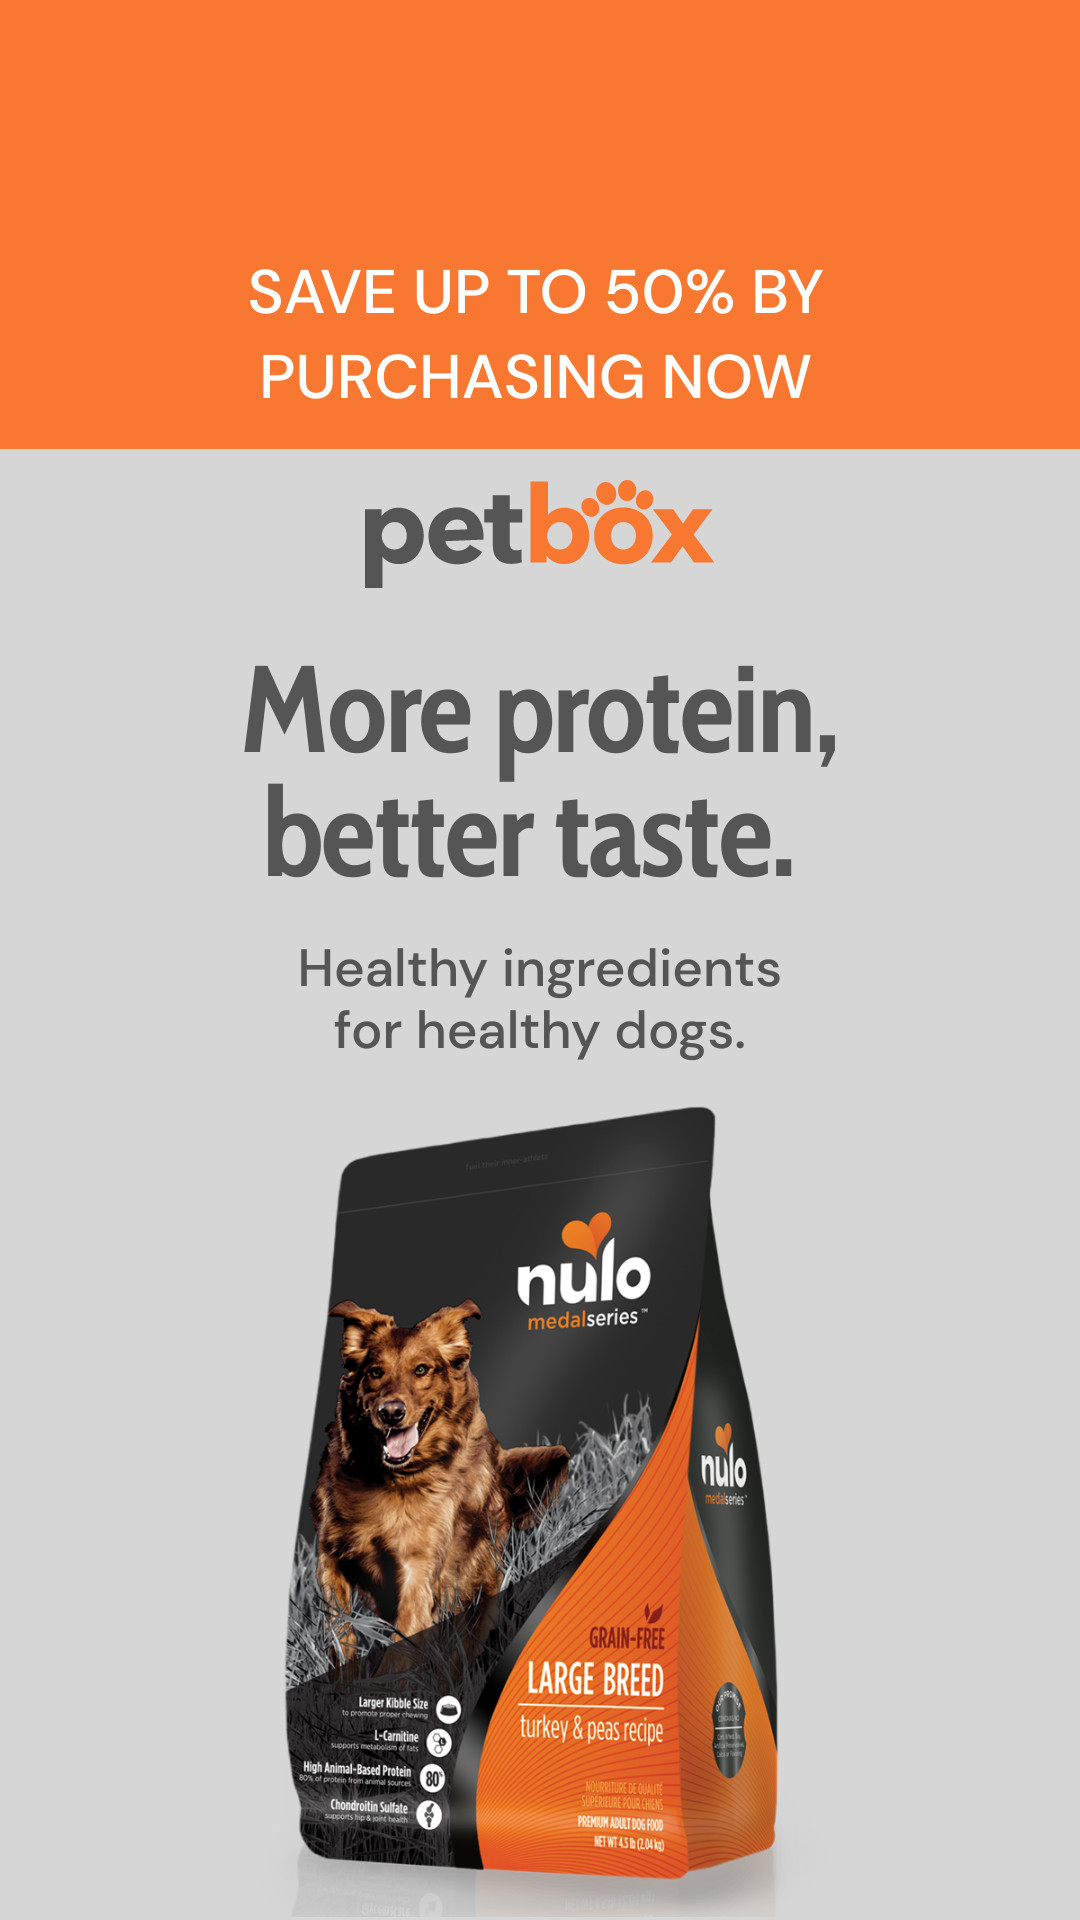 Petbox More Protein Dog Food Inline Rectangle 300x250